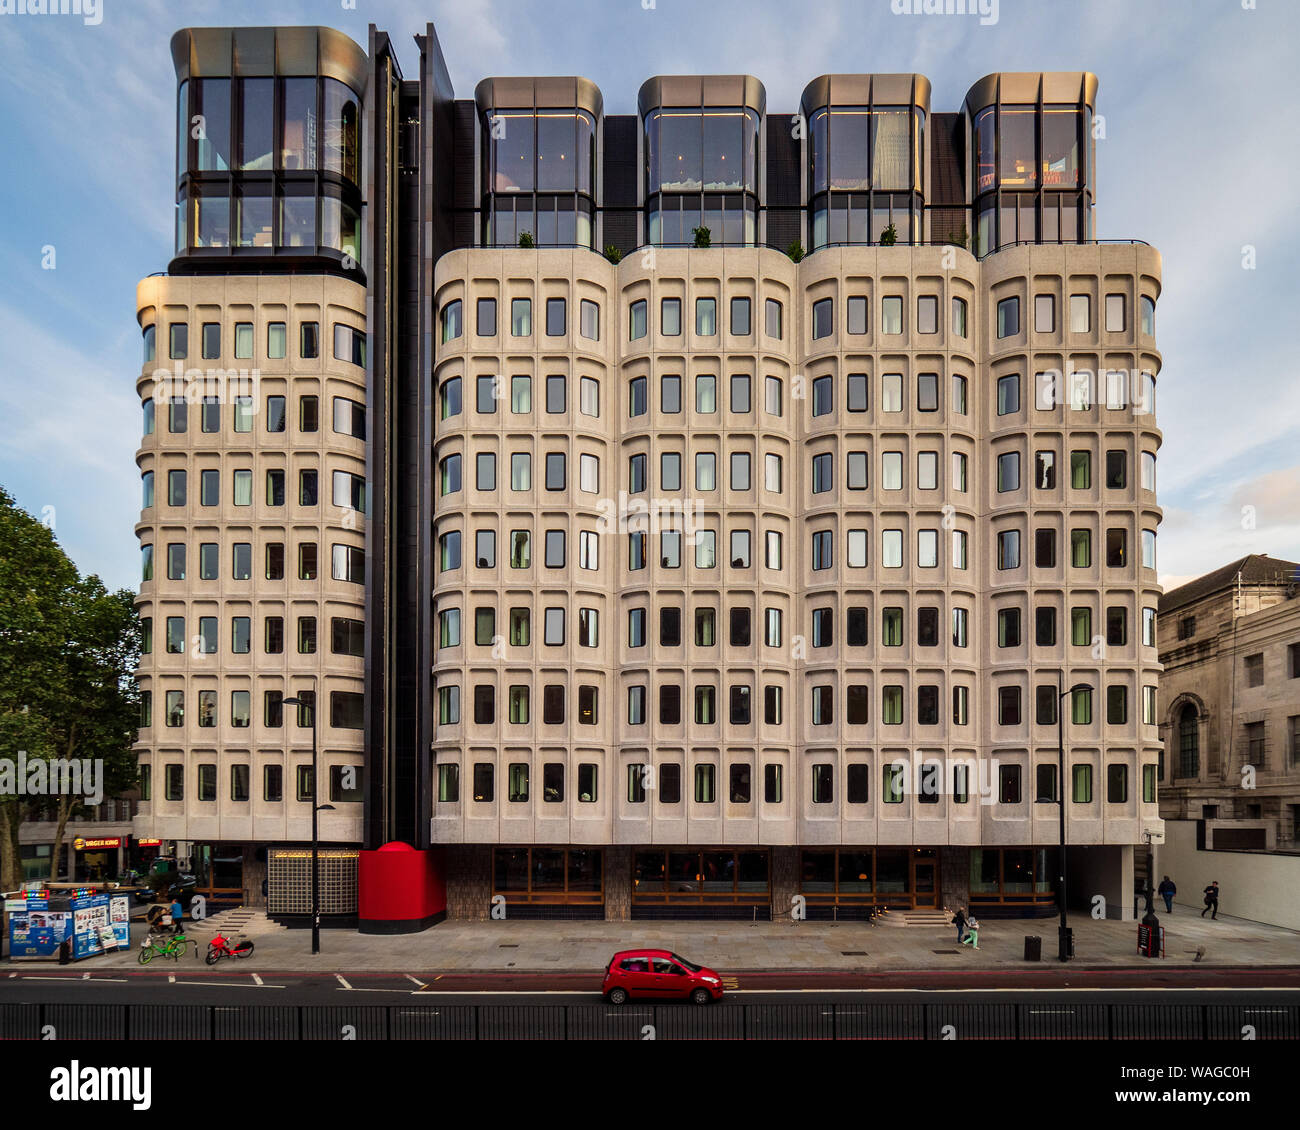 The Standard Hotel Kings Cross London on Euston Road, opened 2019. Design Shawn Hausman, Structural ORMS, Interior Architects Archer Humphryes. Stock Photo